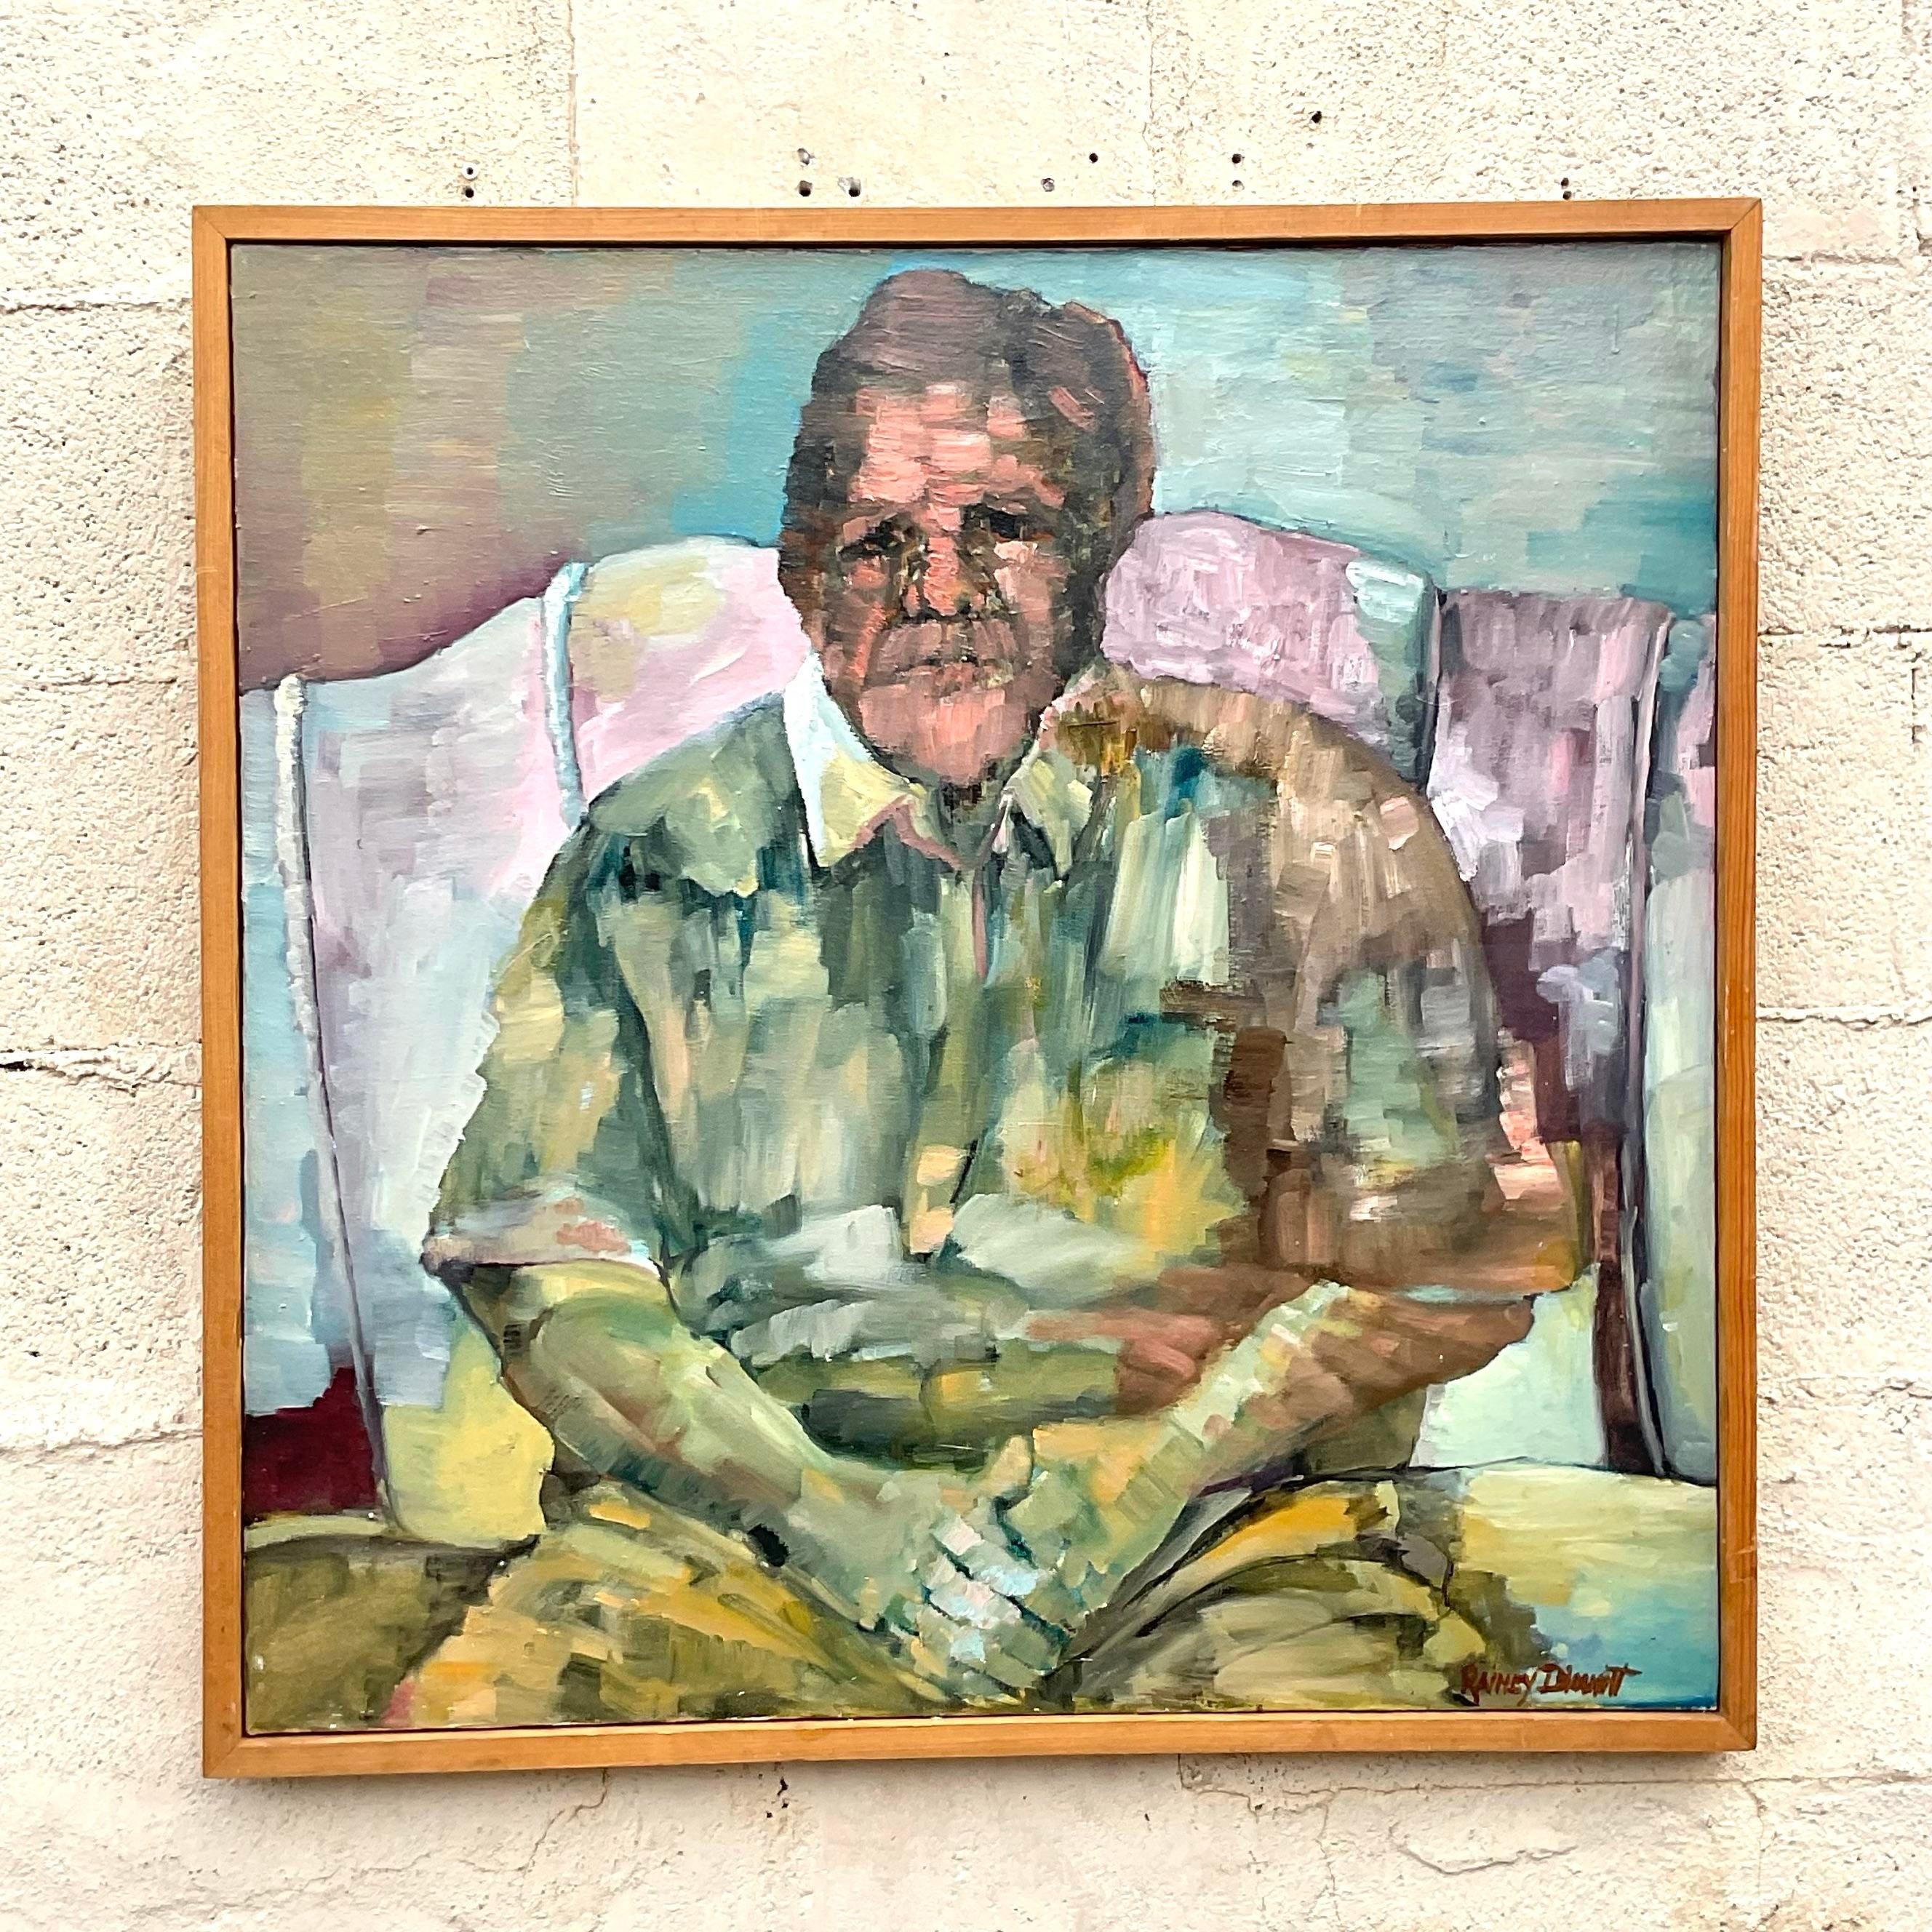 A fantastic vintage Boho original oil on canvas. A chic Abstract Figural portrait with a distictive impasto painterly style. Signed by the artist. Crisp clear colors dominate this composition. Acquired from a Florida estate.